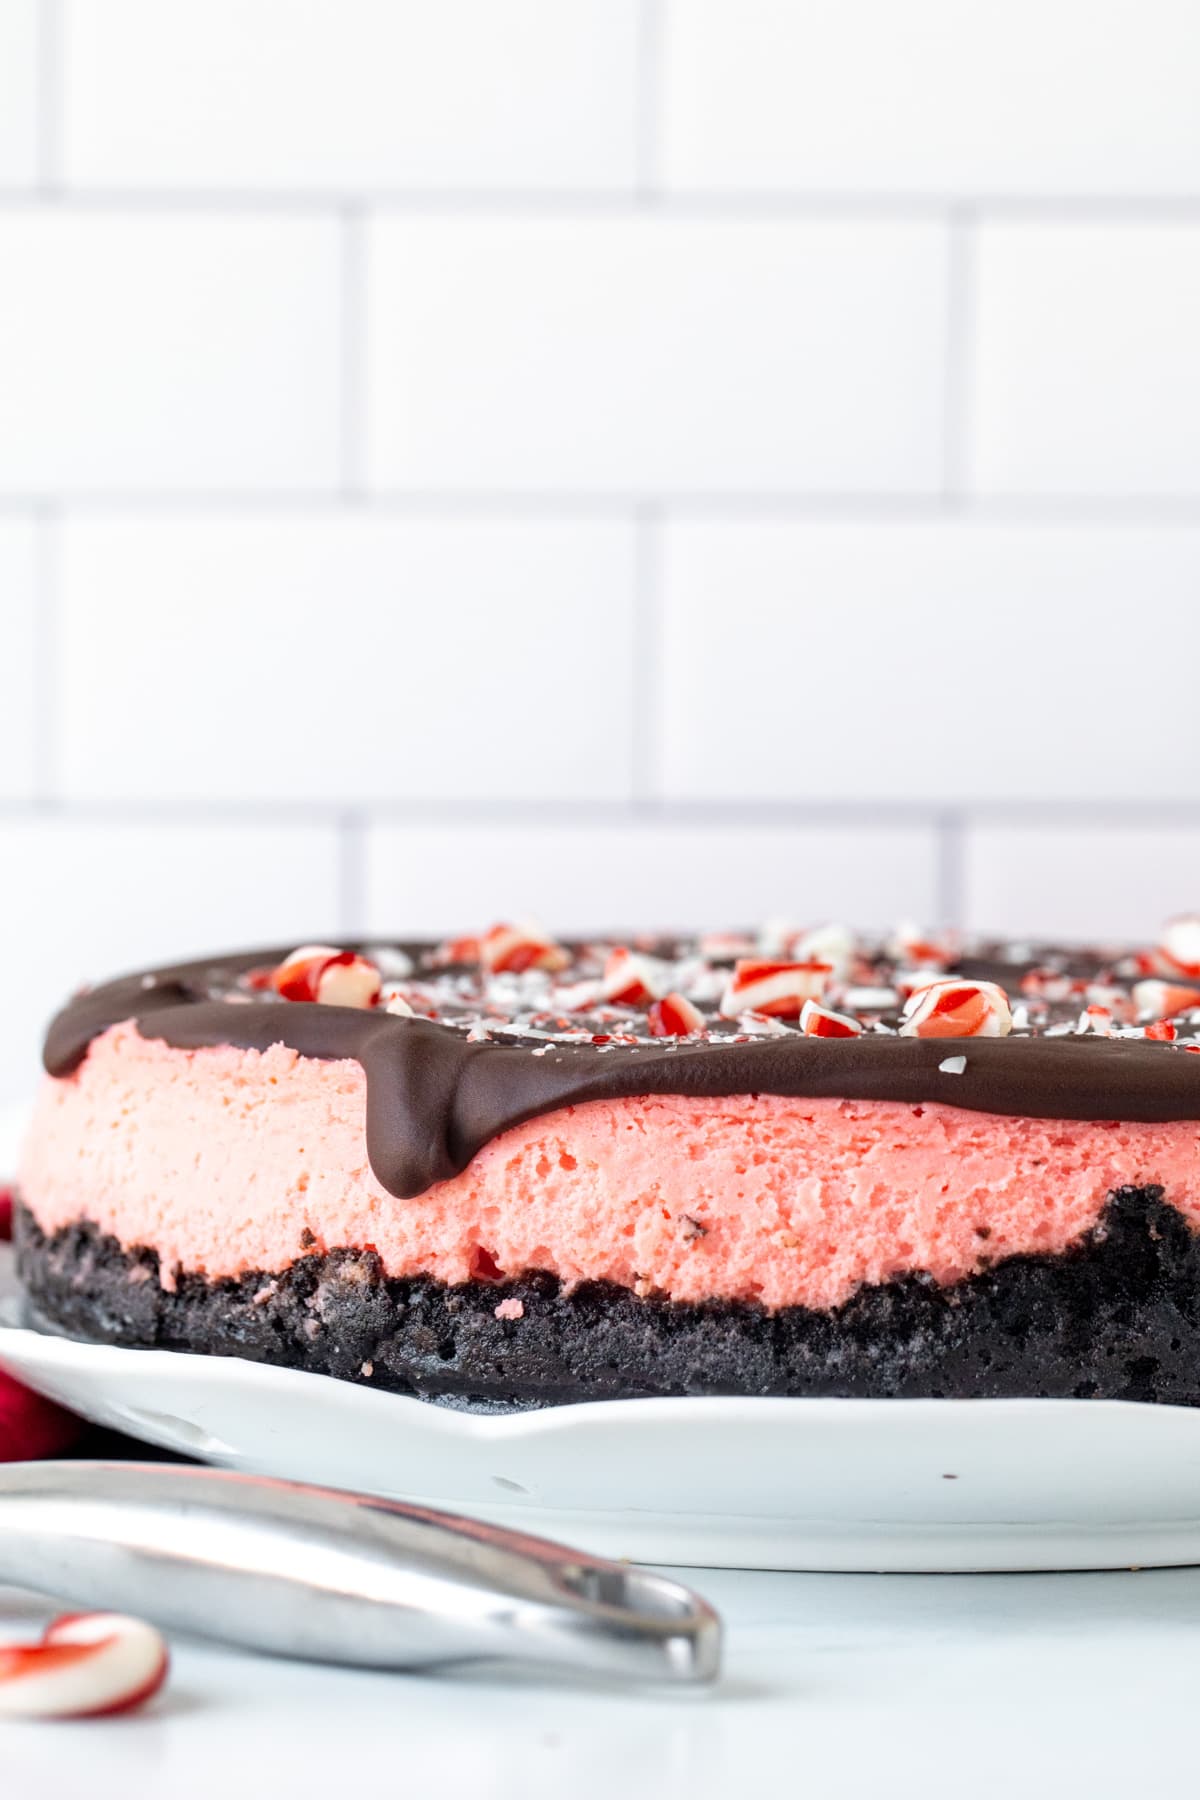 Round candy cane cheesecake with Oreo crust and chocolate topping on a white plate